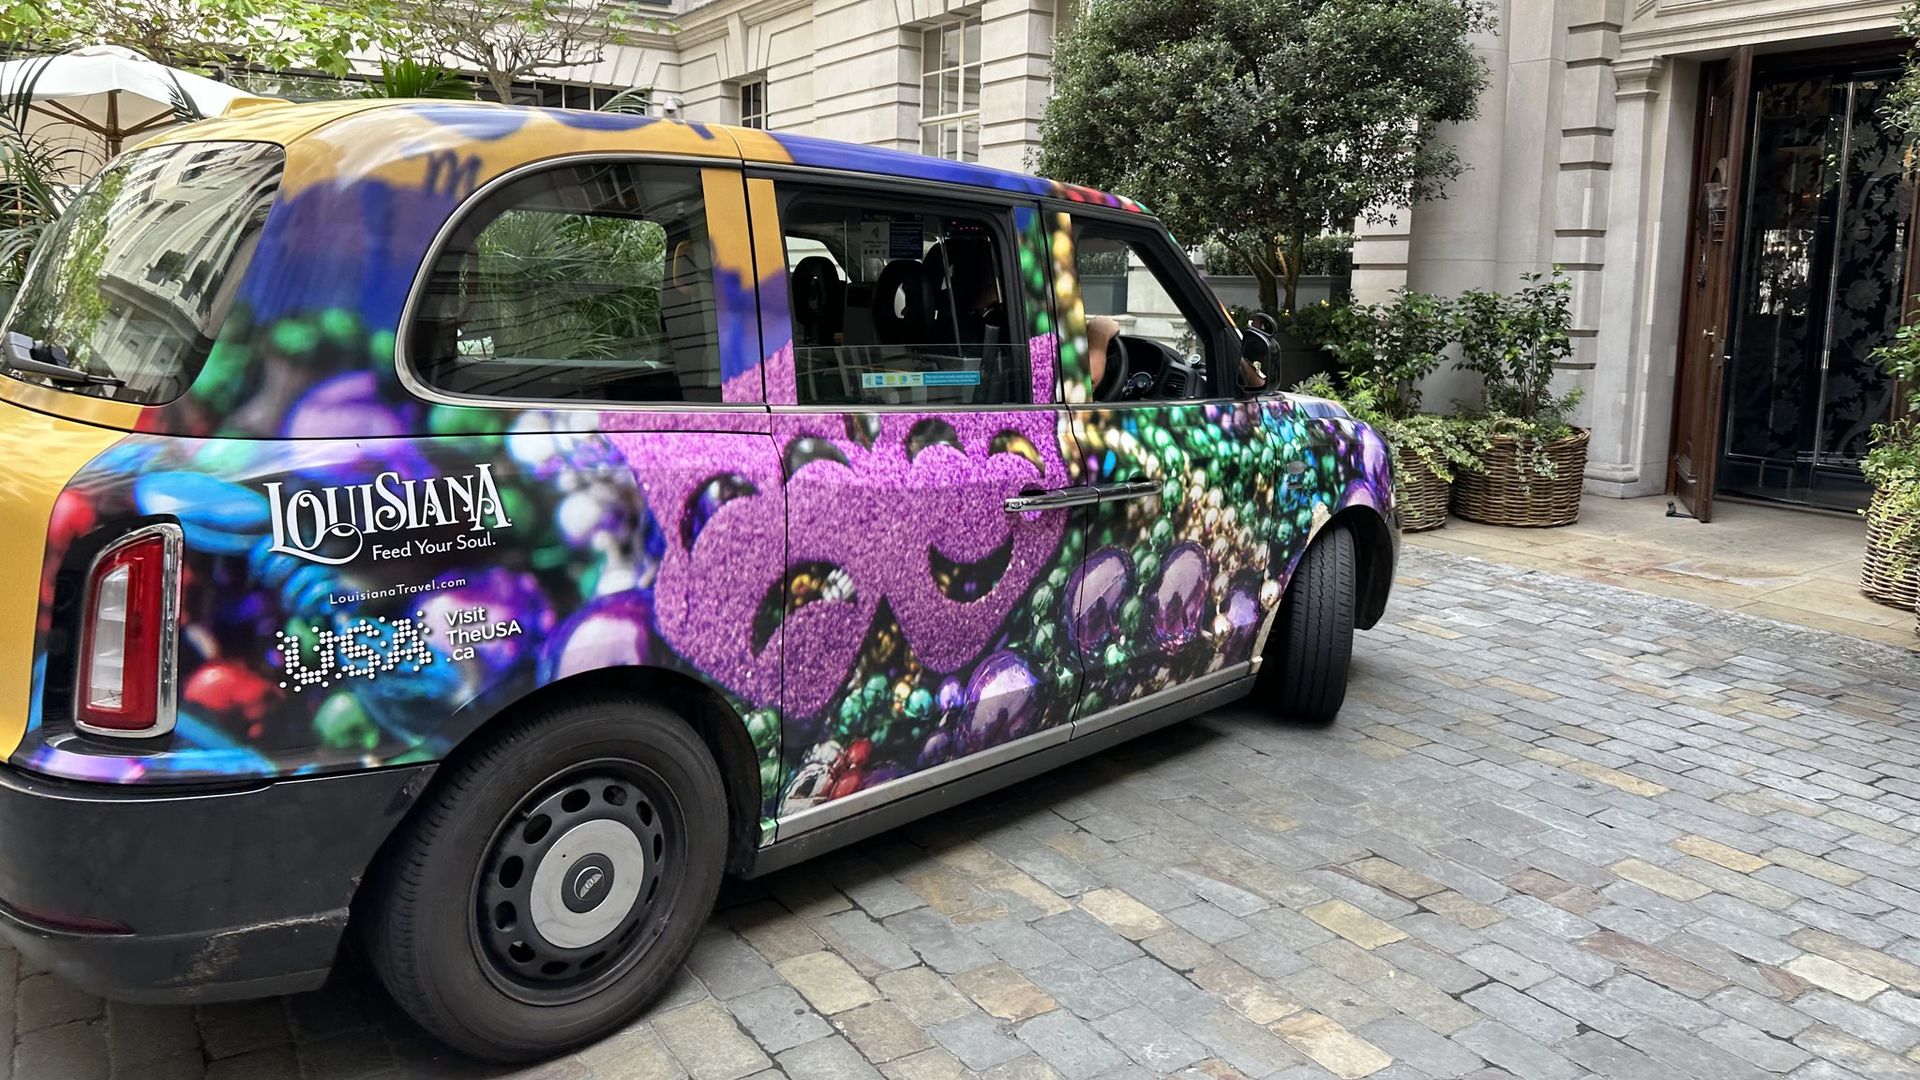 Photo shows a London taxi wrapped in pictures of Mardi Gras beads with a Louisiana logo on the side